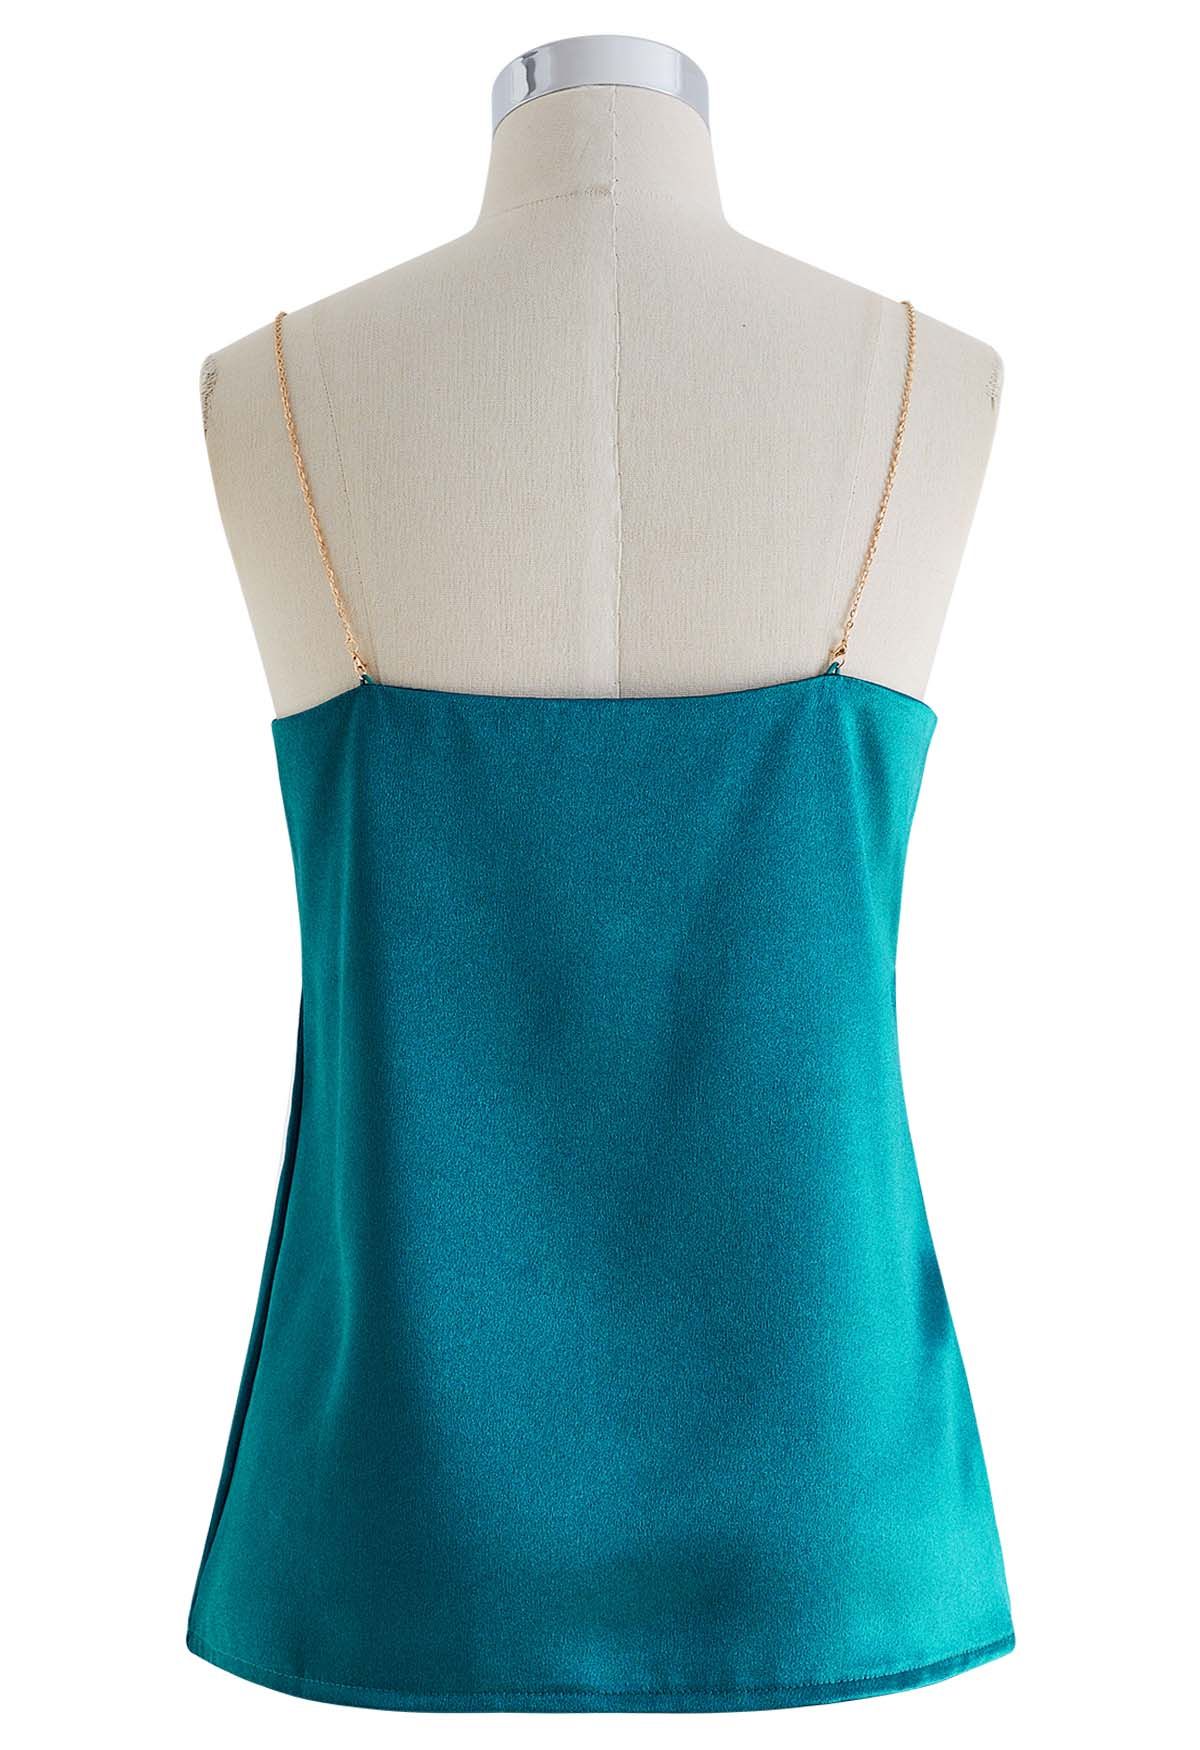 Golden Chain Embellished Satin Cami Top in Emerald